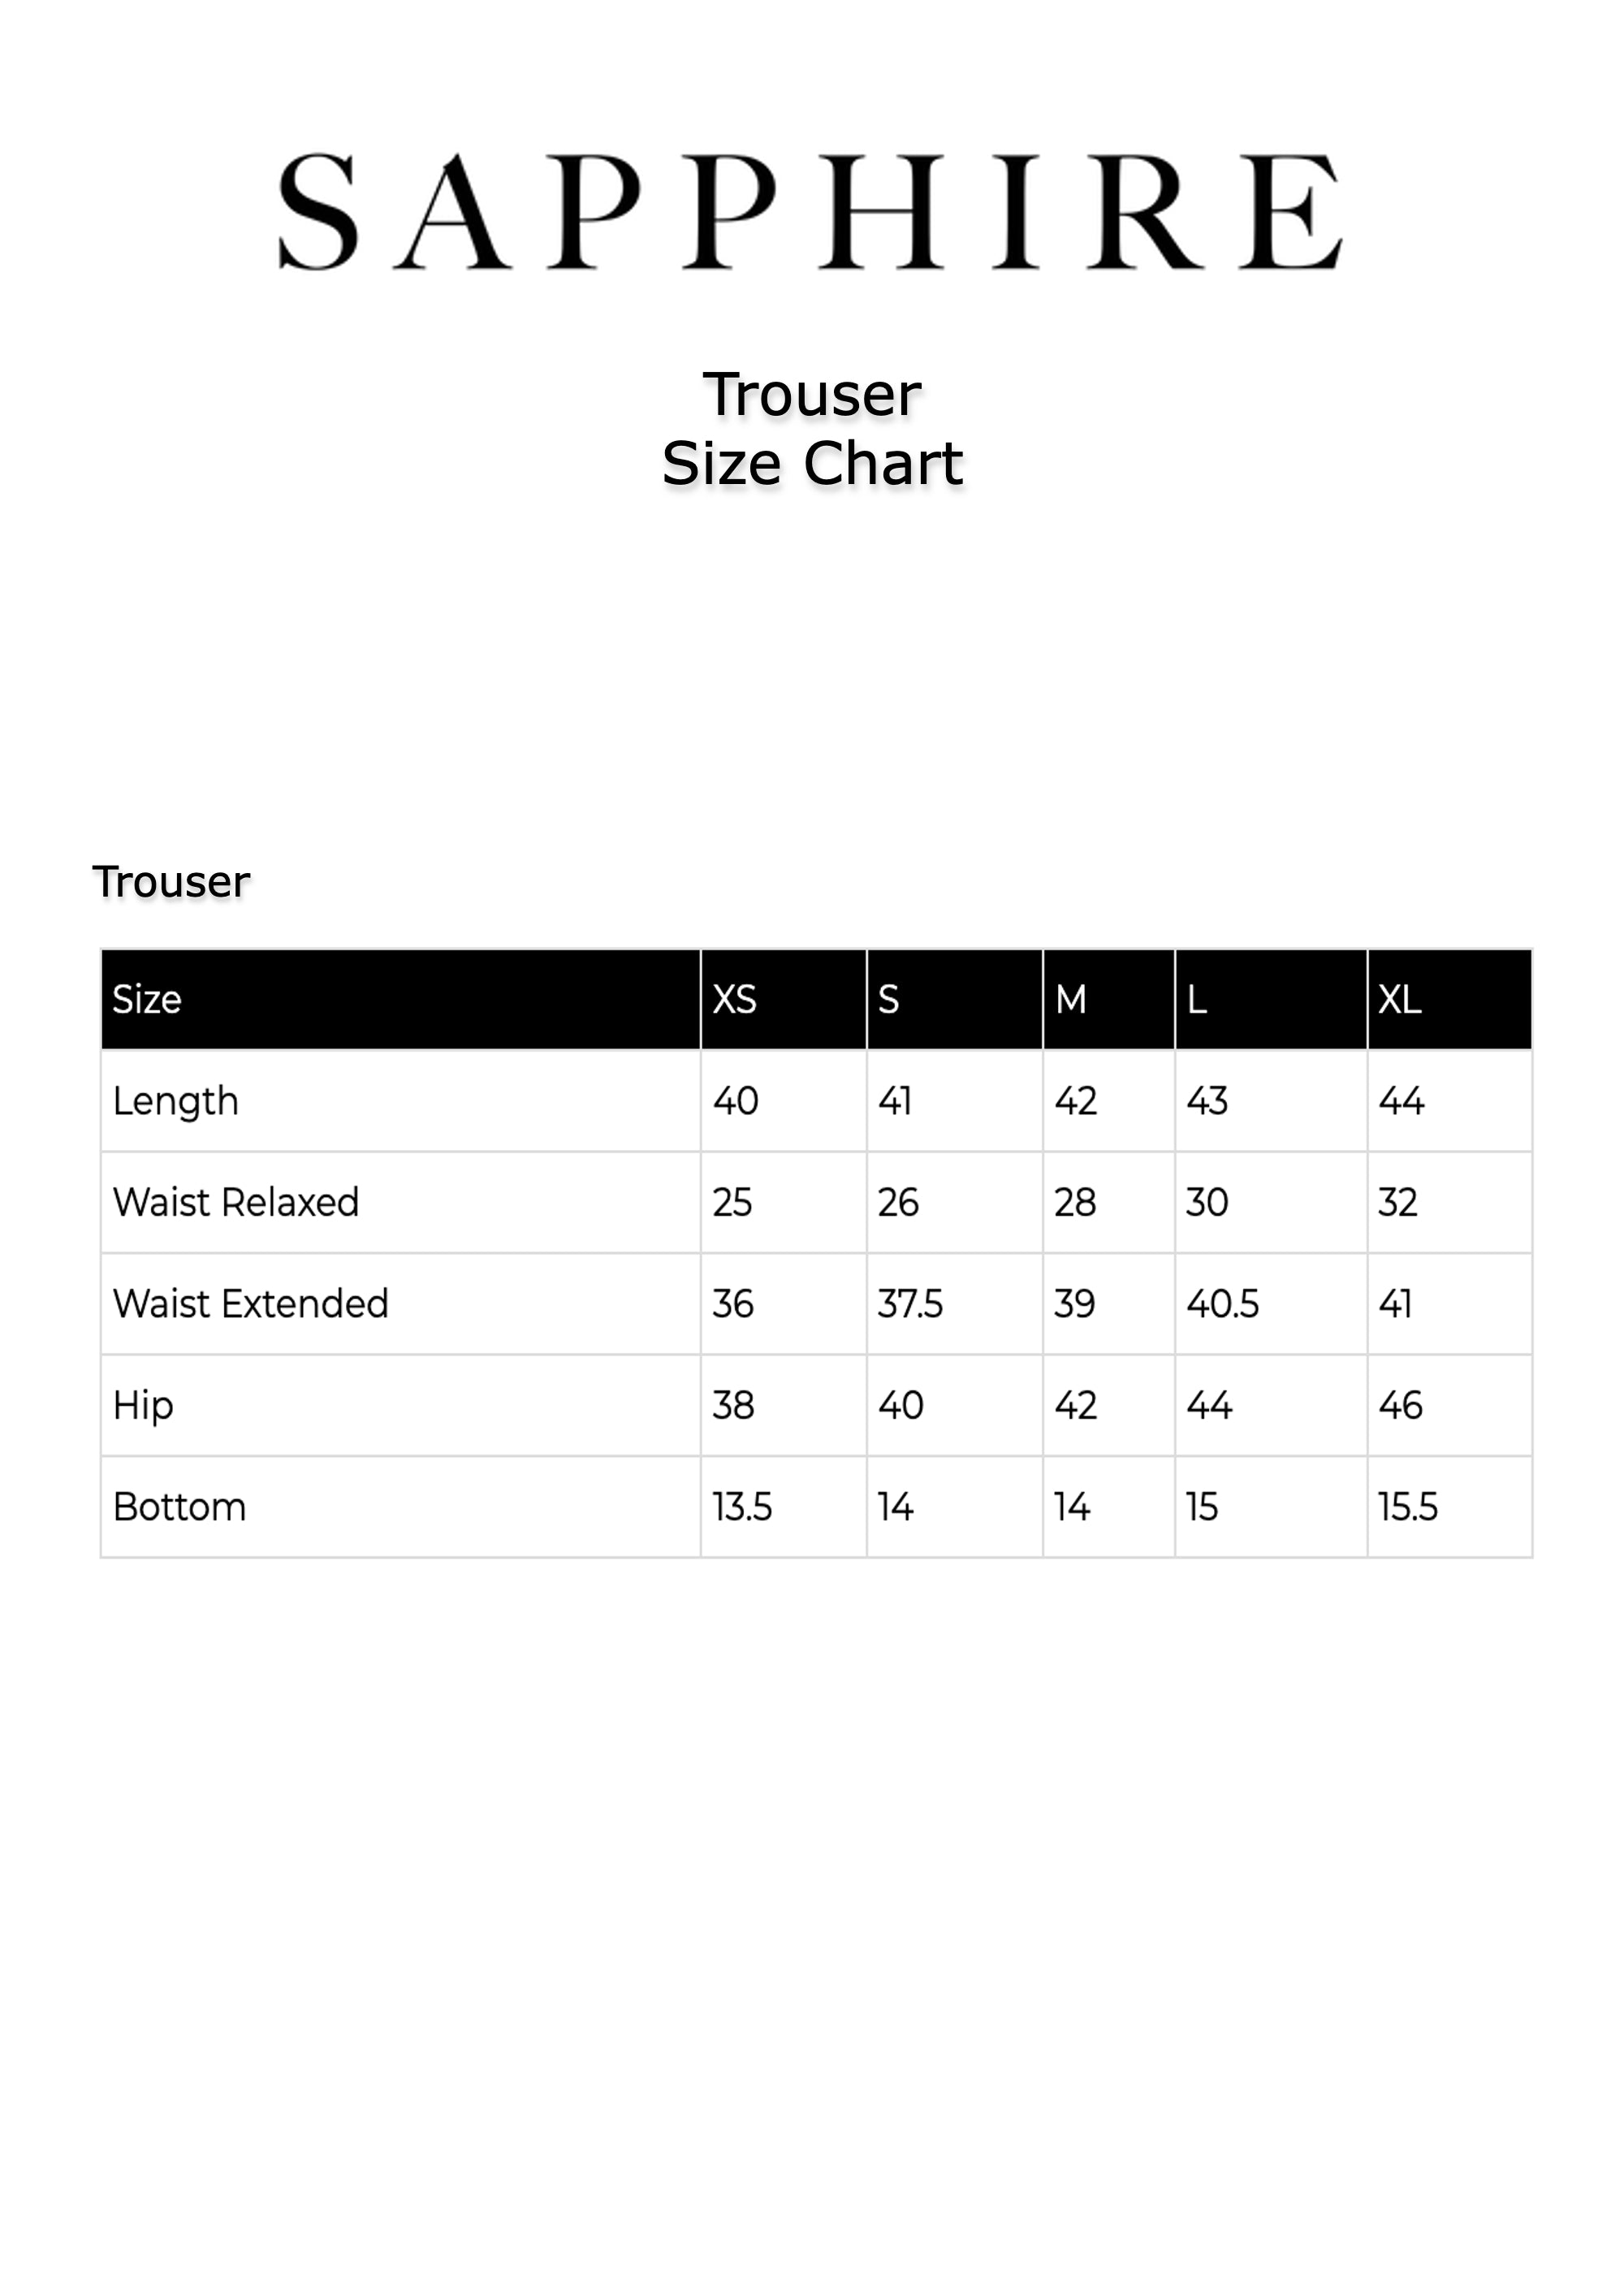 How to take Gents, Trouser/Jean Measurements - YouTube